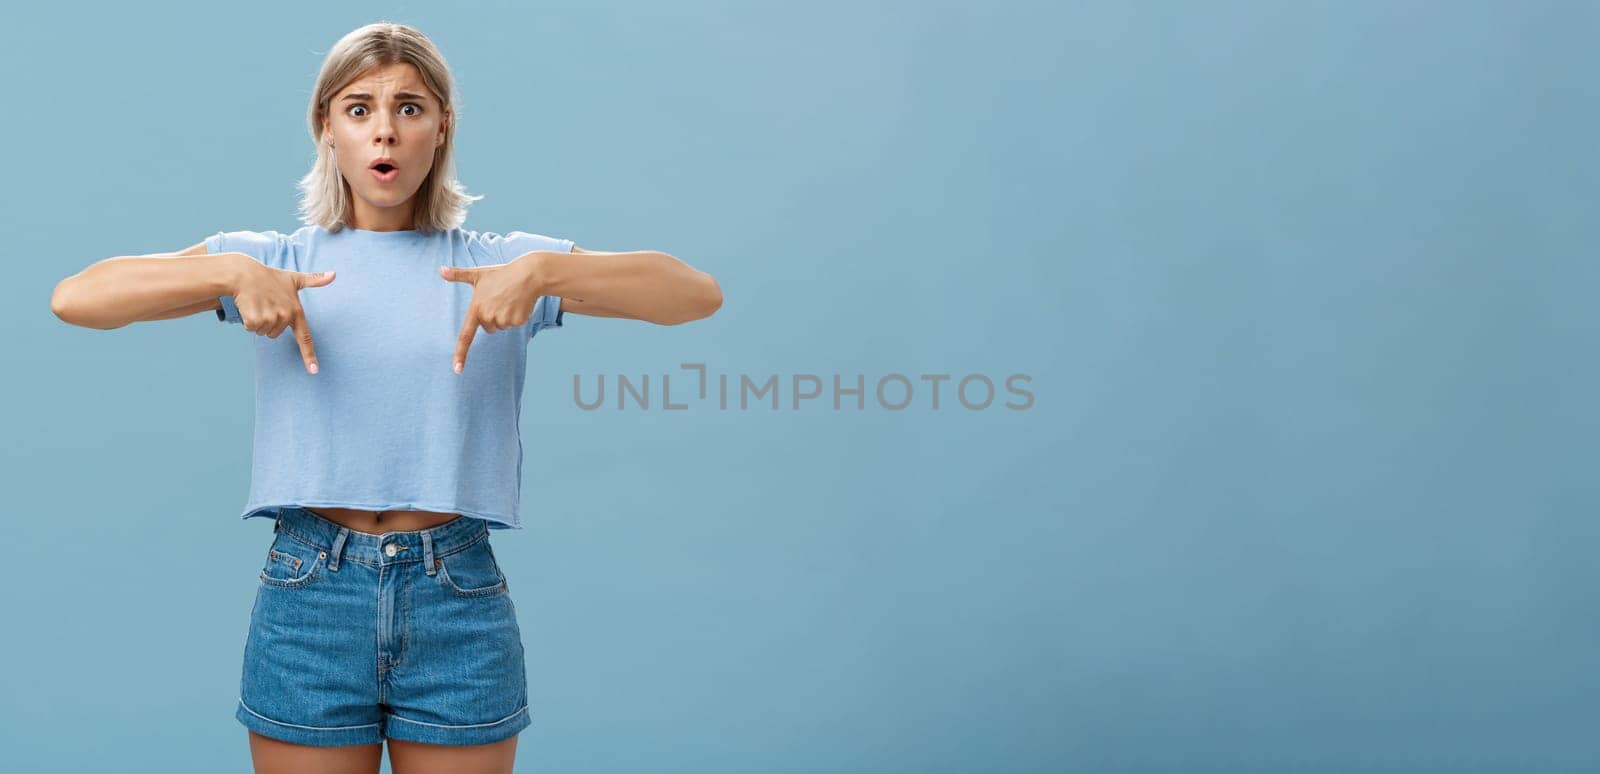 Lifestyle. Studio shot of worried caucasian young woman feeling nervous her shoes do not fit frowning asking advice nervously pointing down shocked while frowning and standing over blue background.